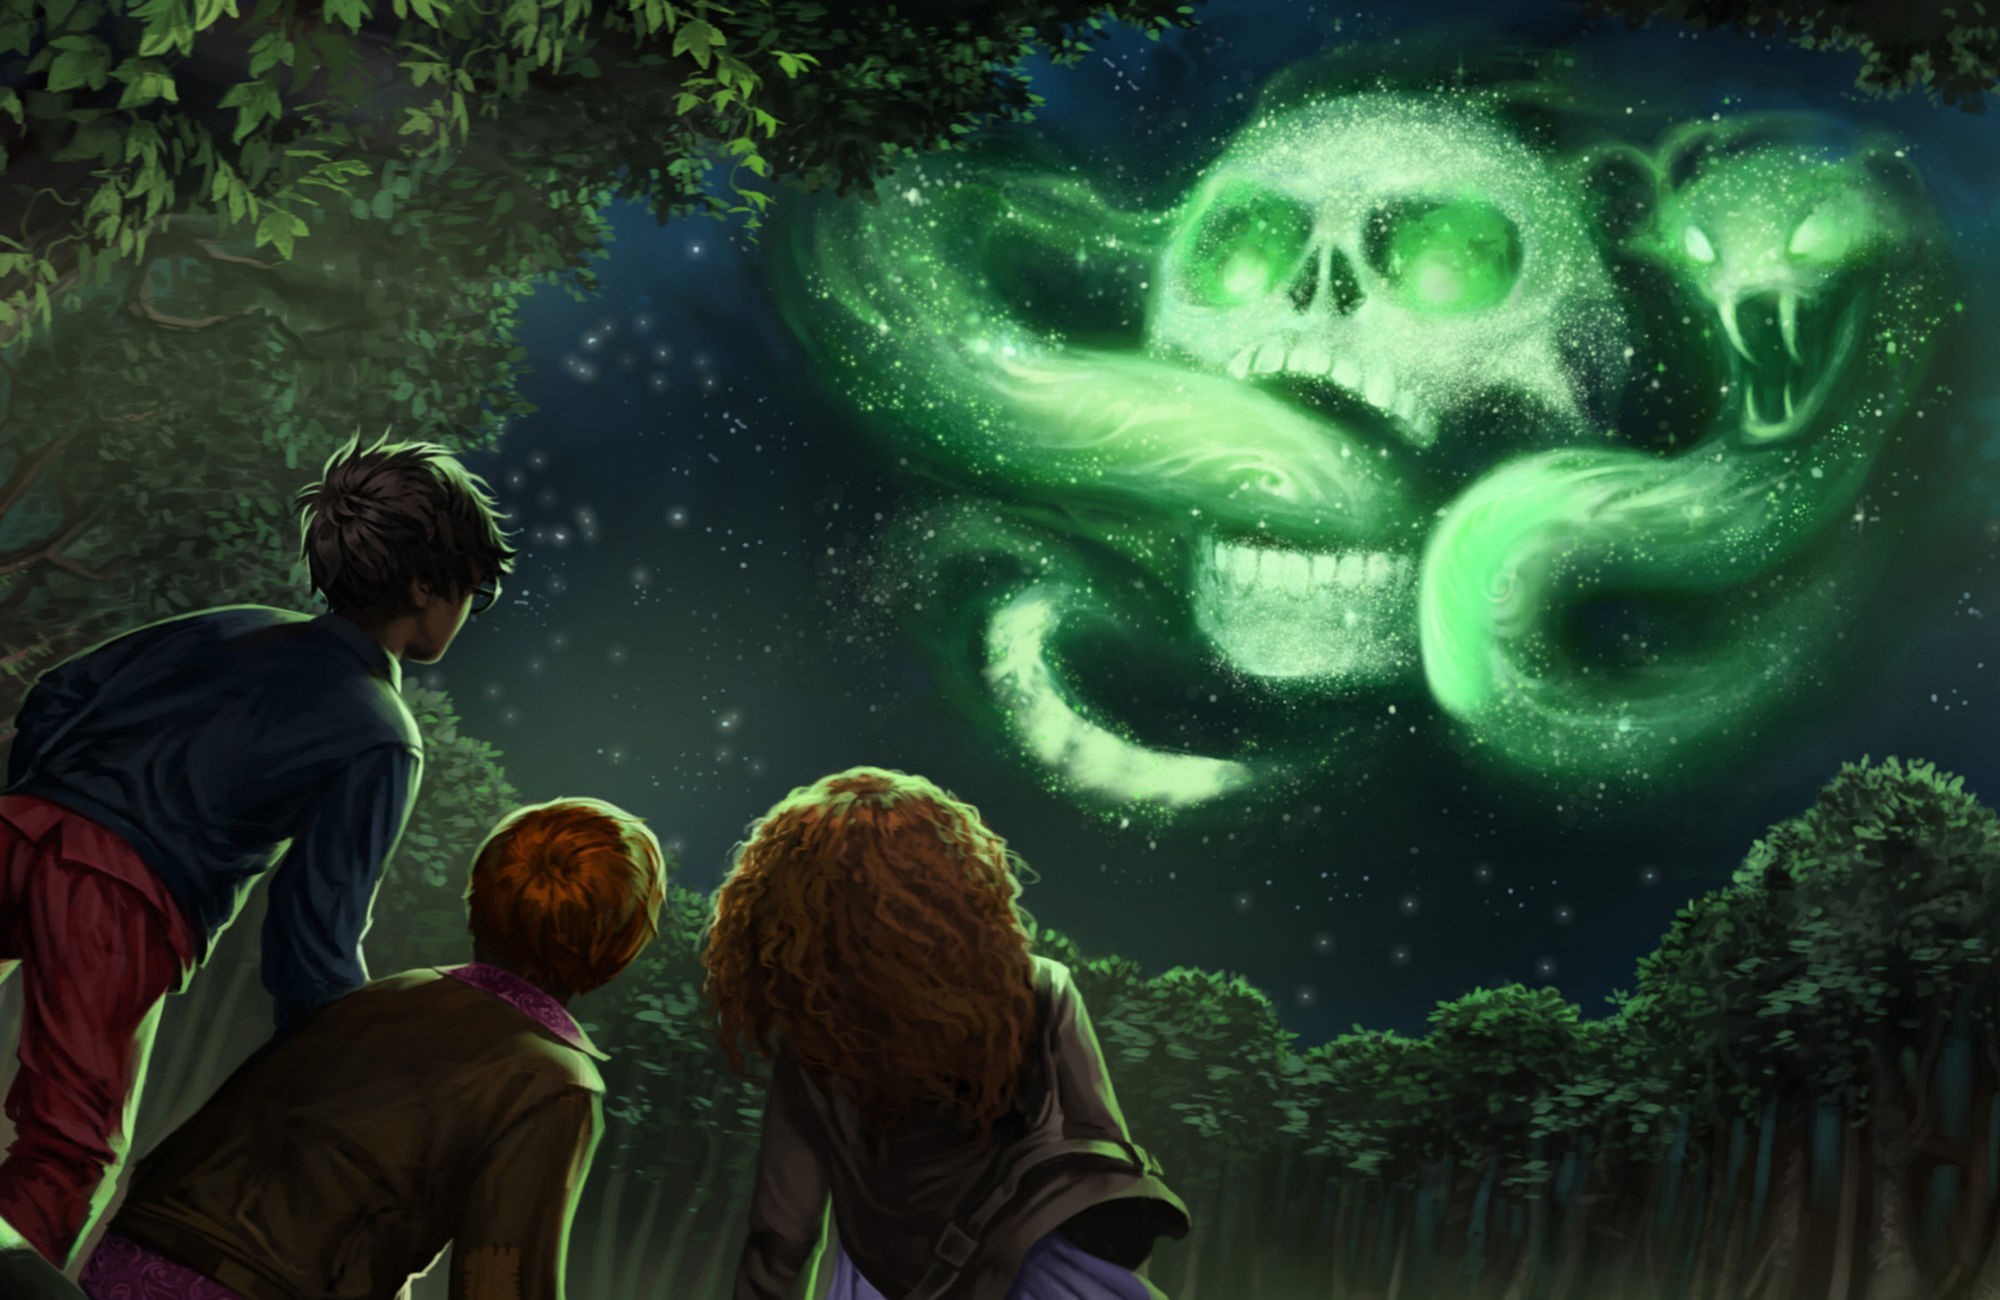 Harry Potter And The Goblet Of Fire Wallpapers